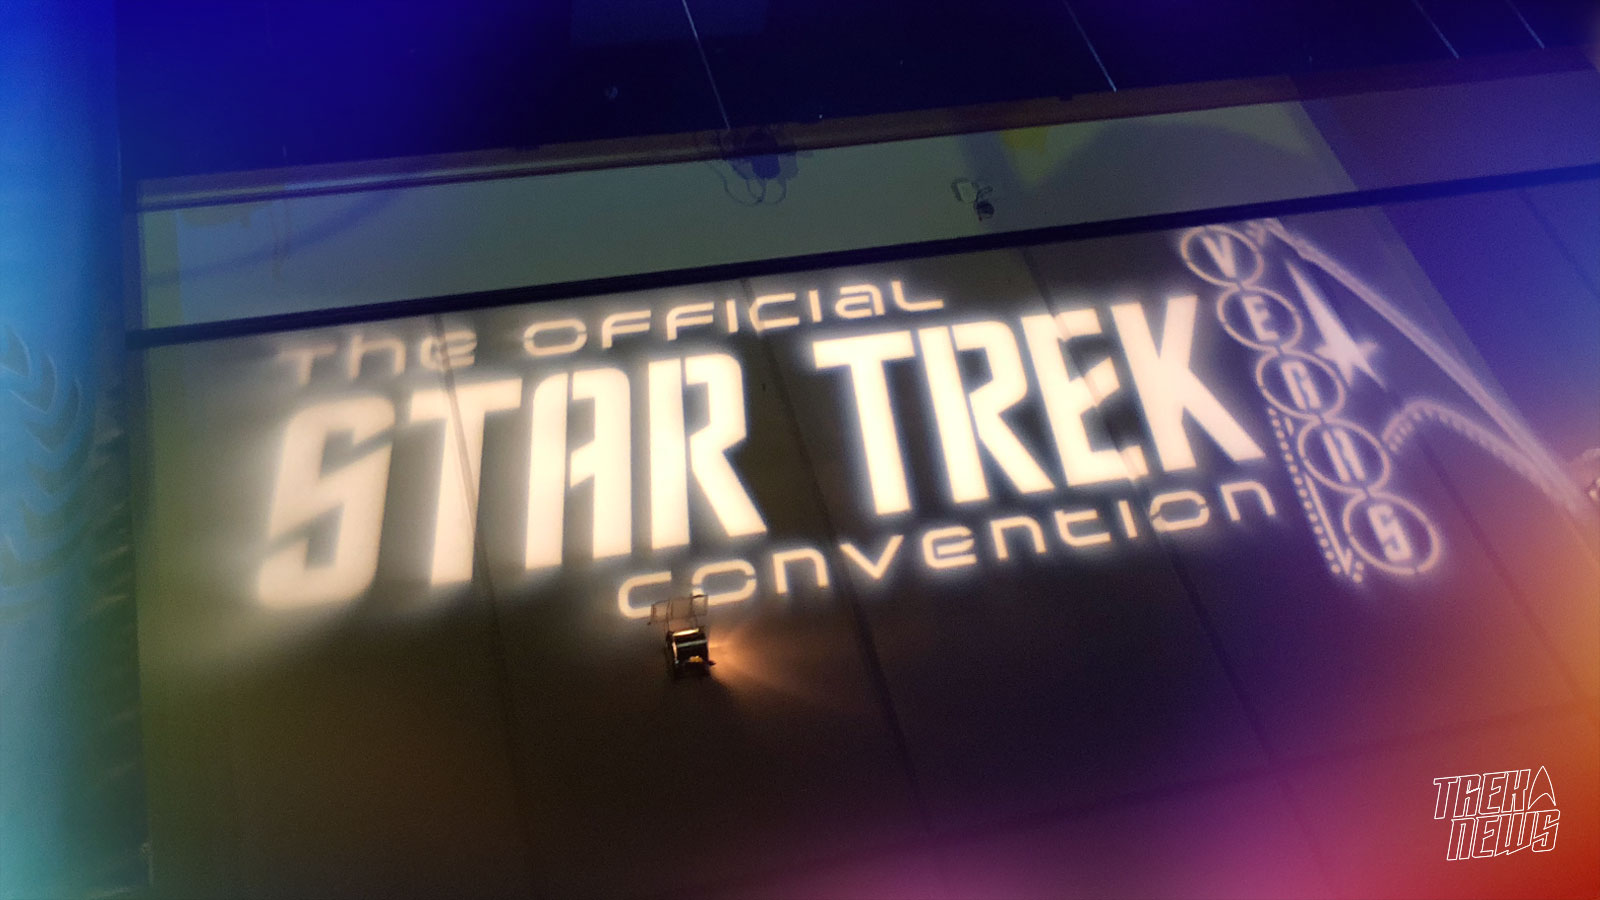 Star Trek Las Vegas Preview: 'Discovery' And 'Deep Space Nine' To Take Center Stage